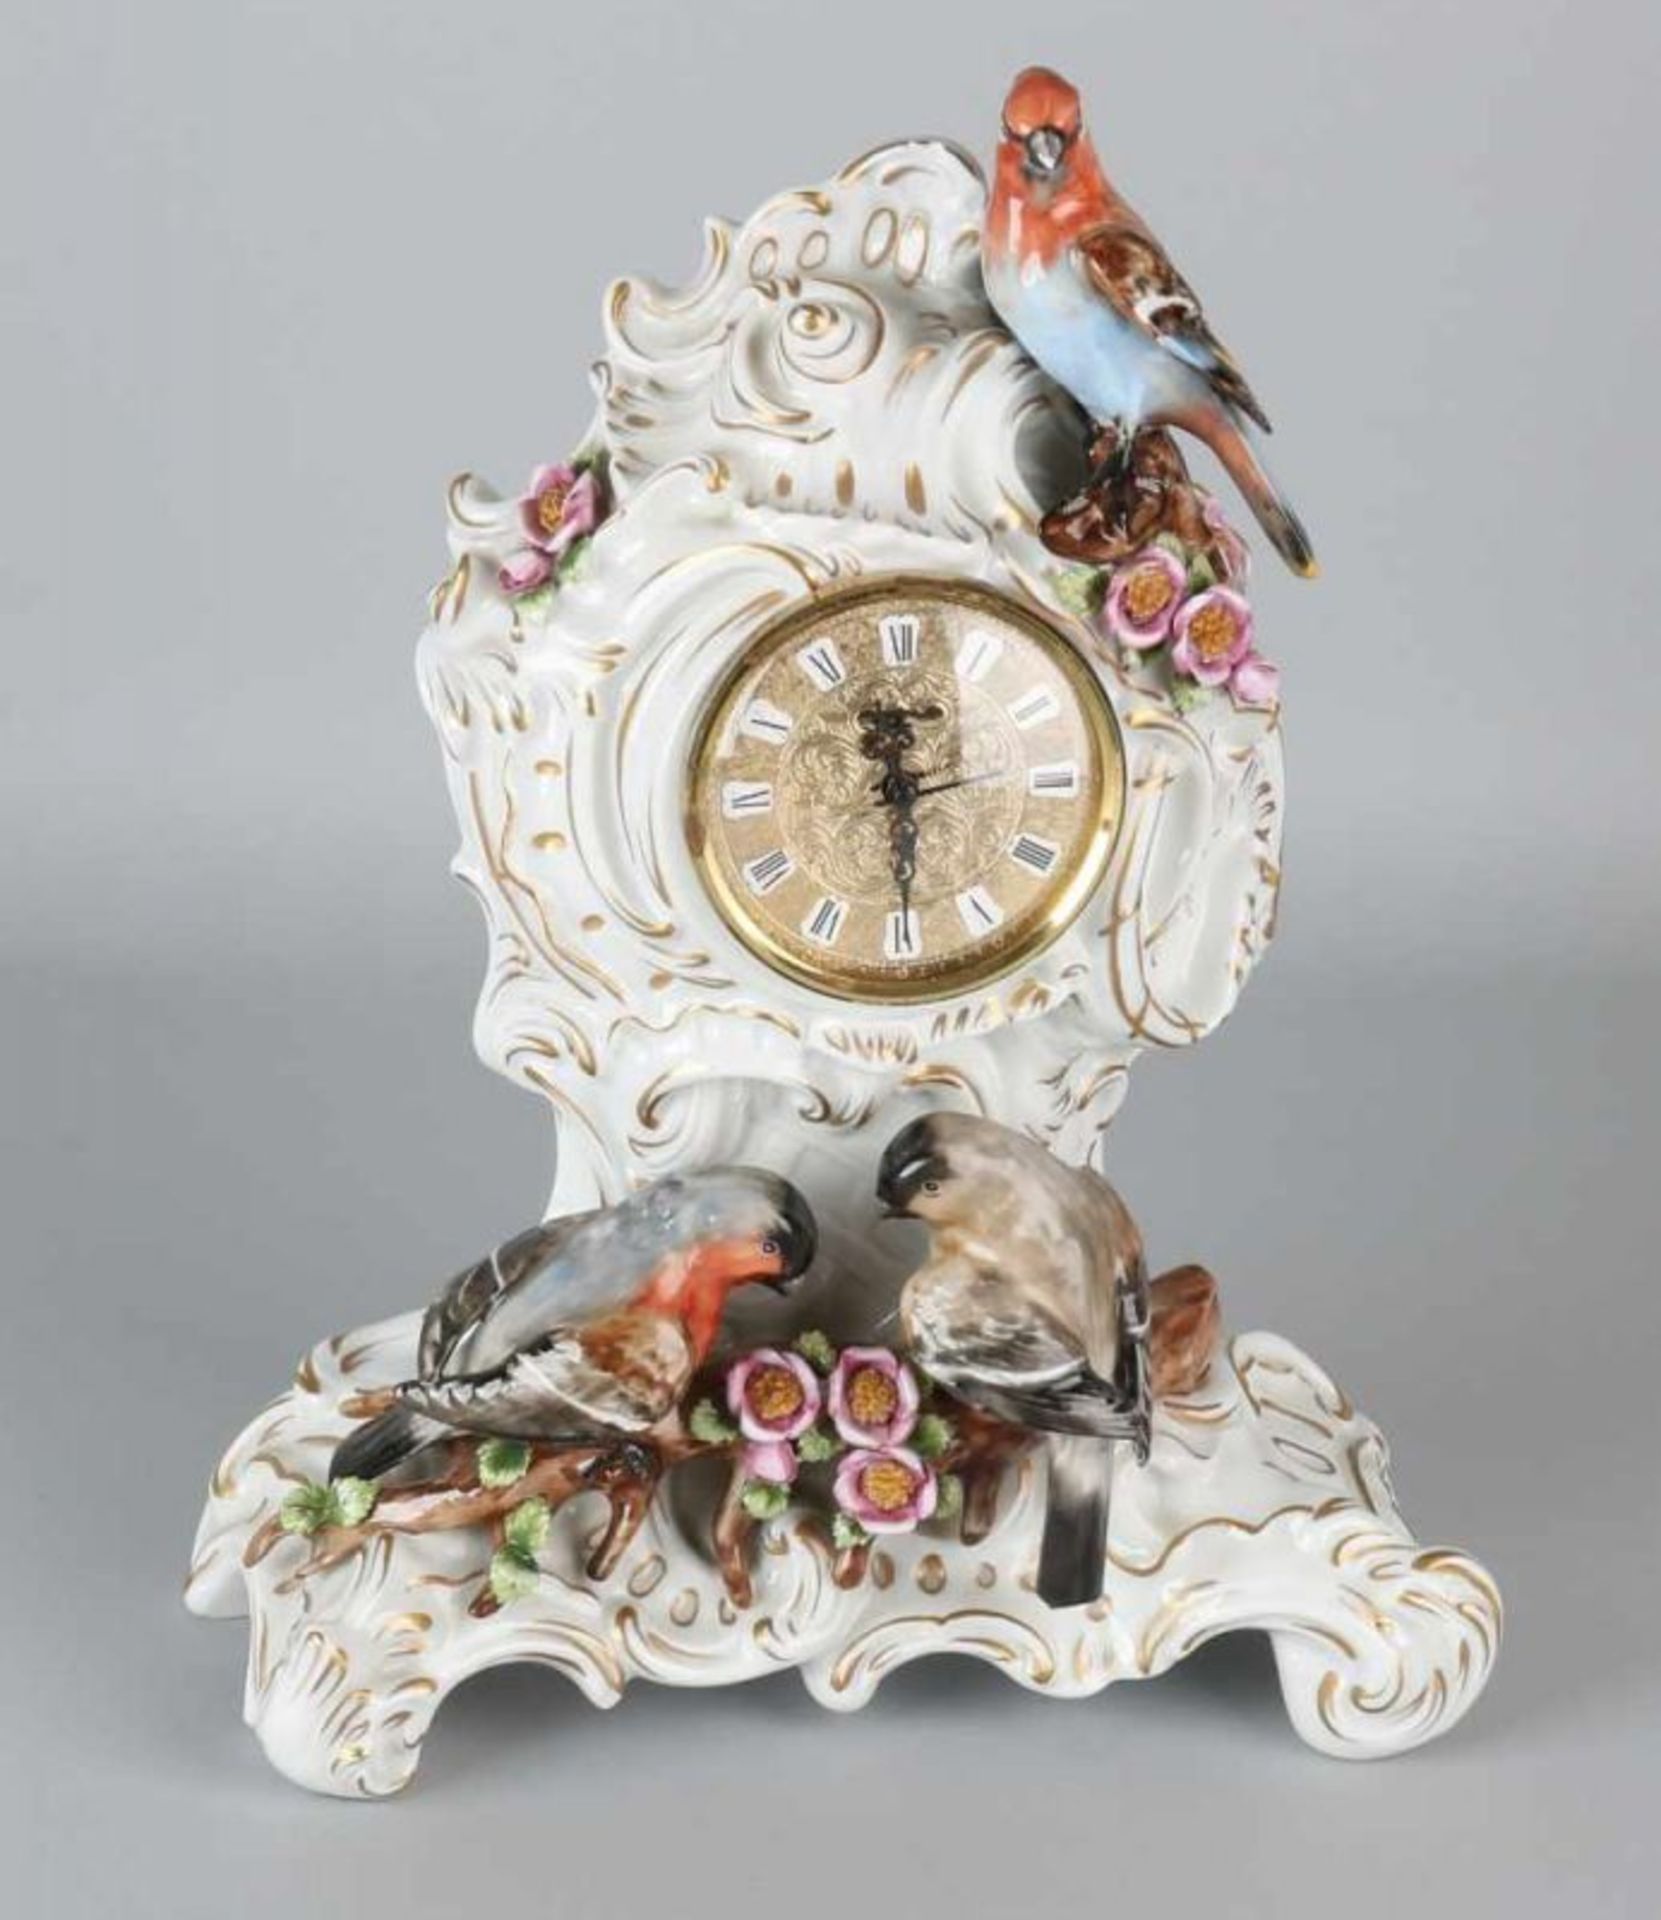 German porcelain clock. Marked with a crown and 1882. Decorated with gold decor, birds, flowers.